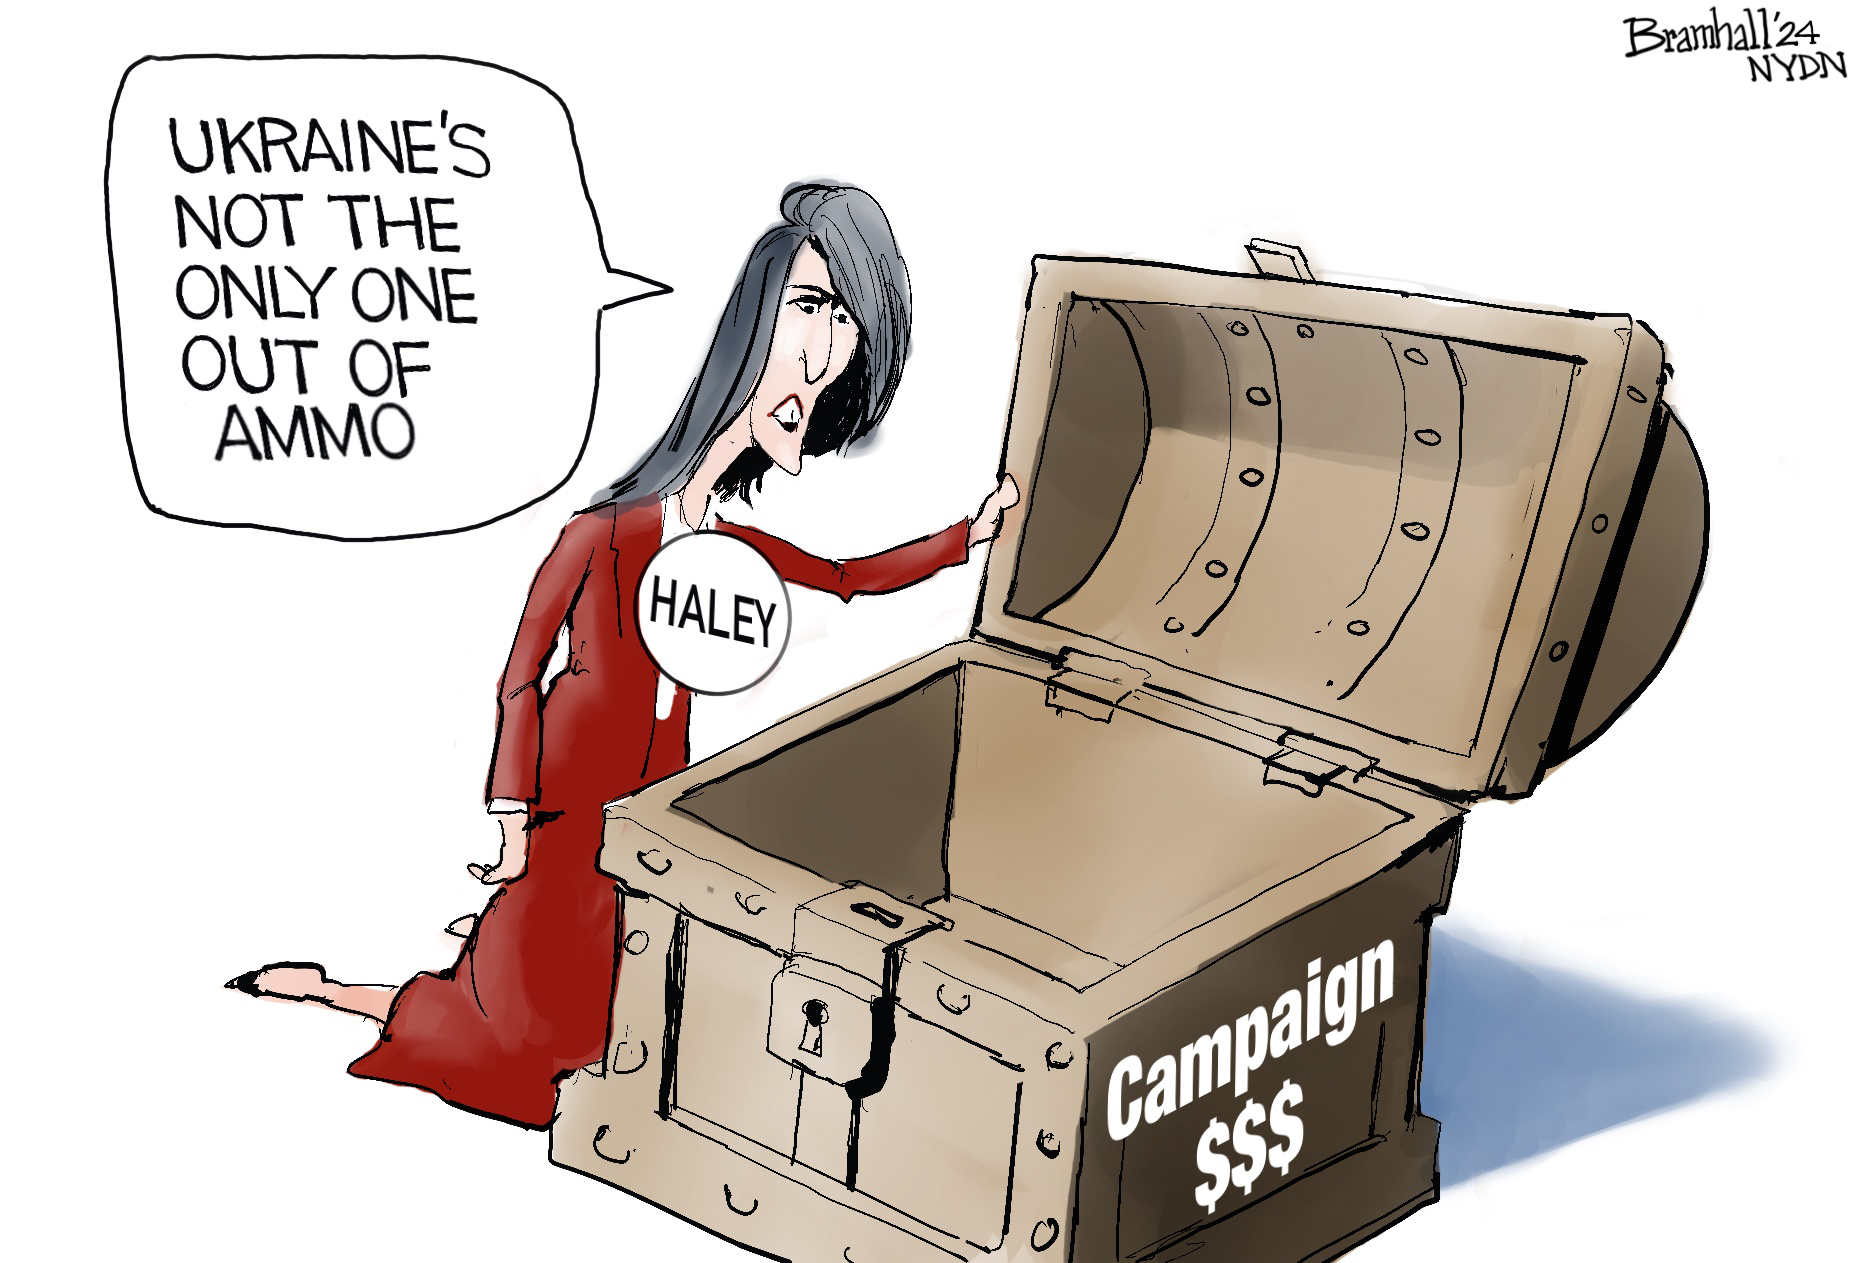  Today's political cartoons - March 3, 2024 